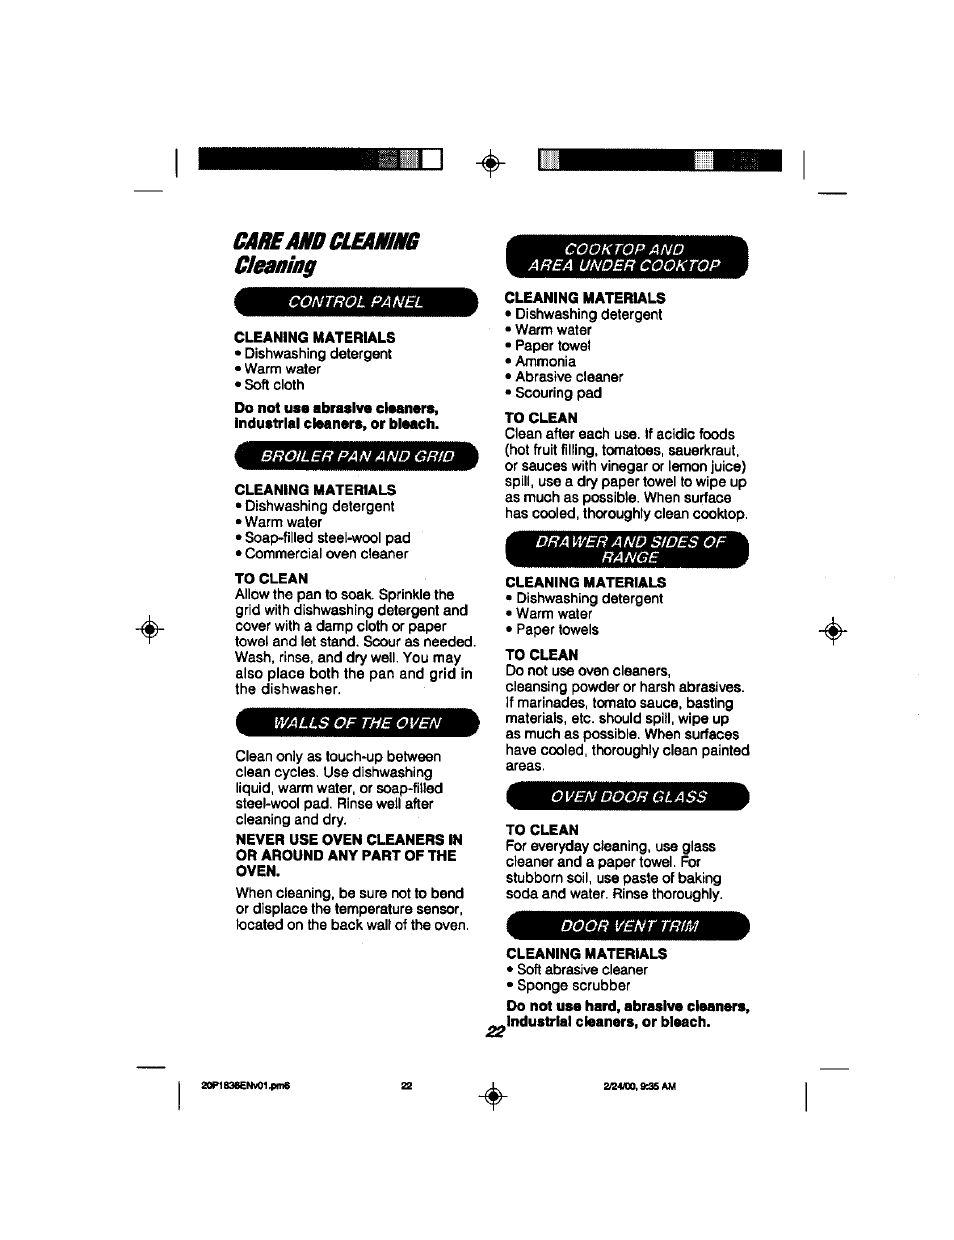 Care and cleaning, Cl^niag | Kenmore 911.93508 User Manual | Page 22 / 34